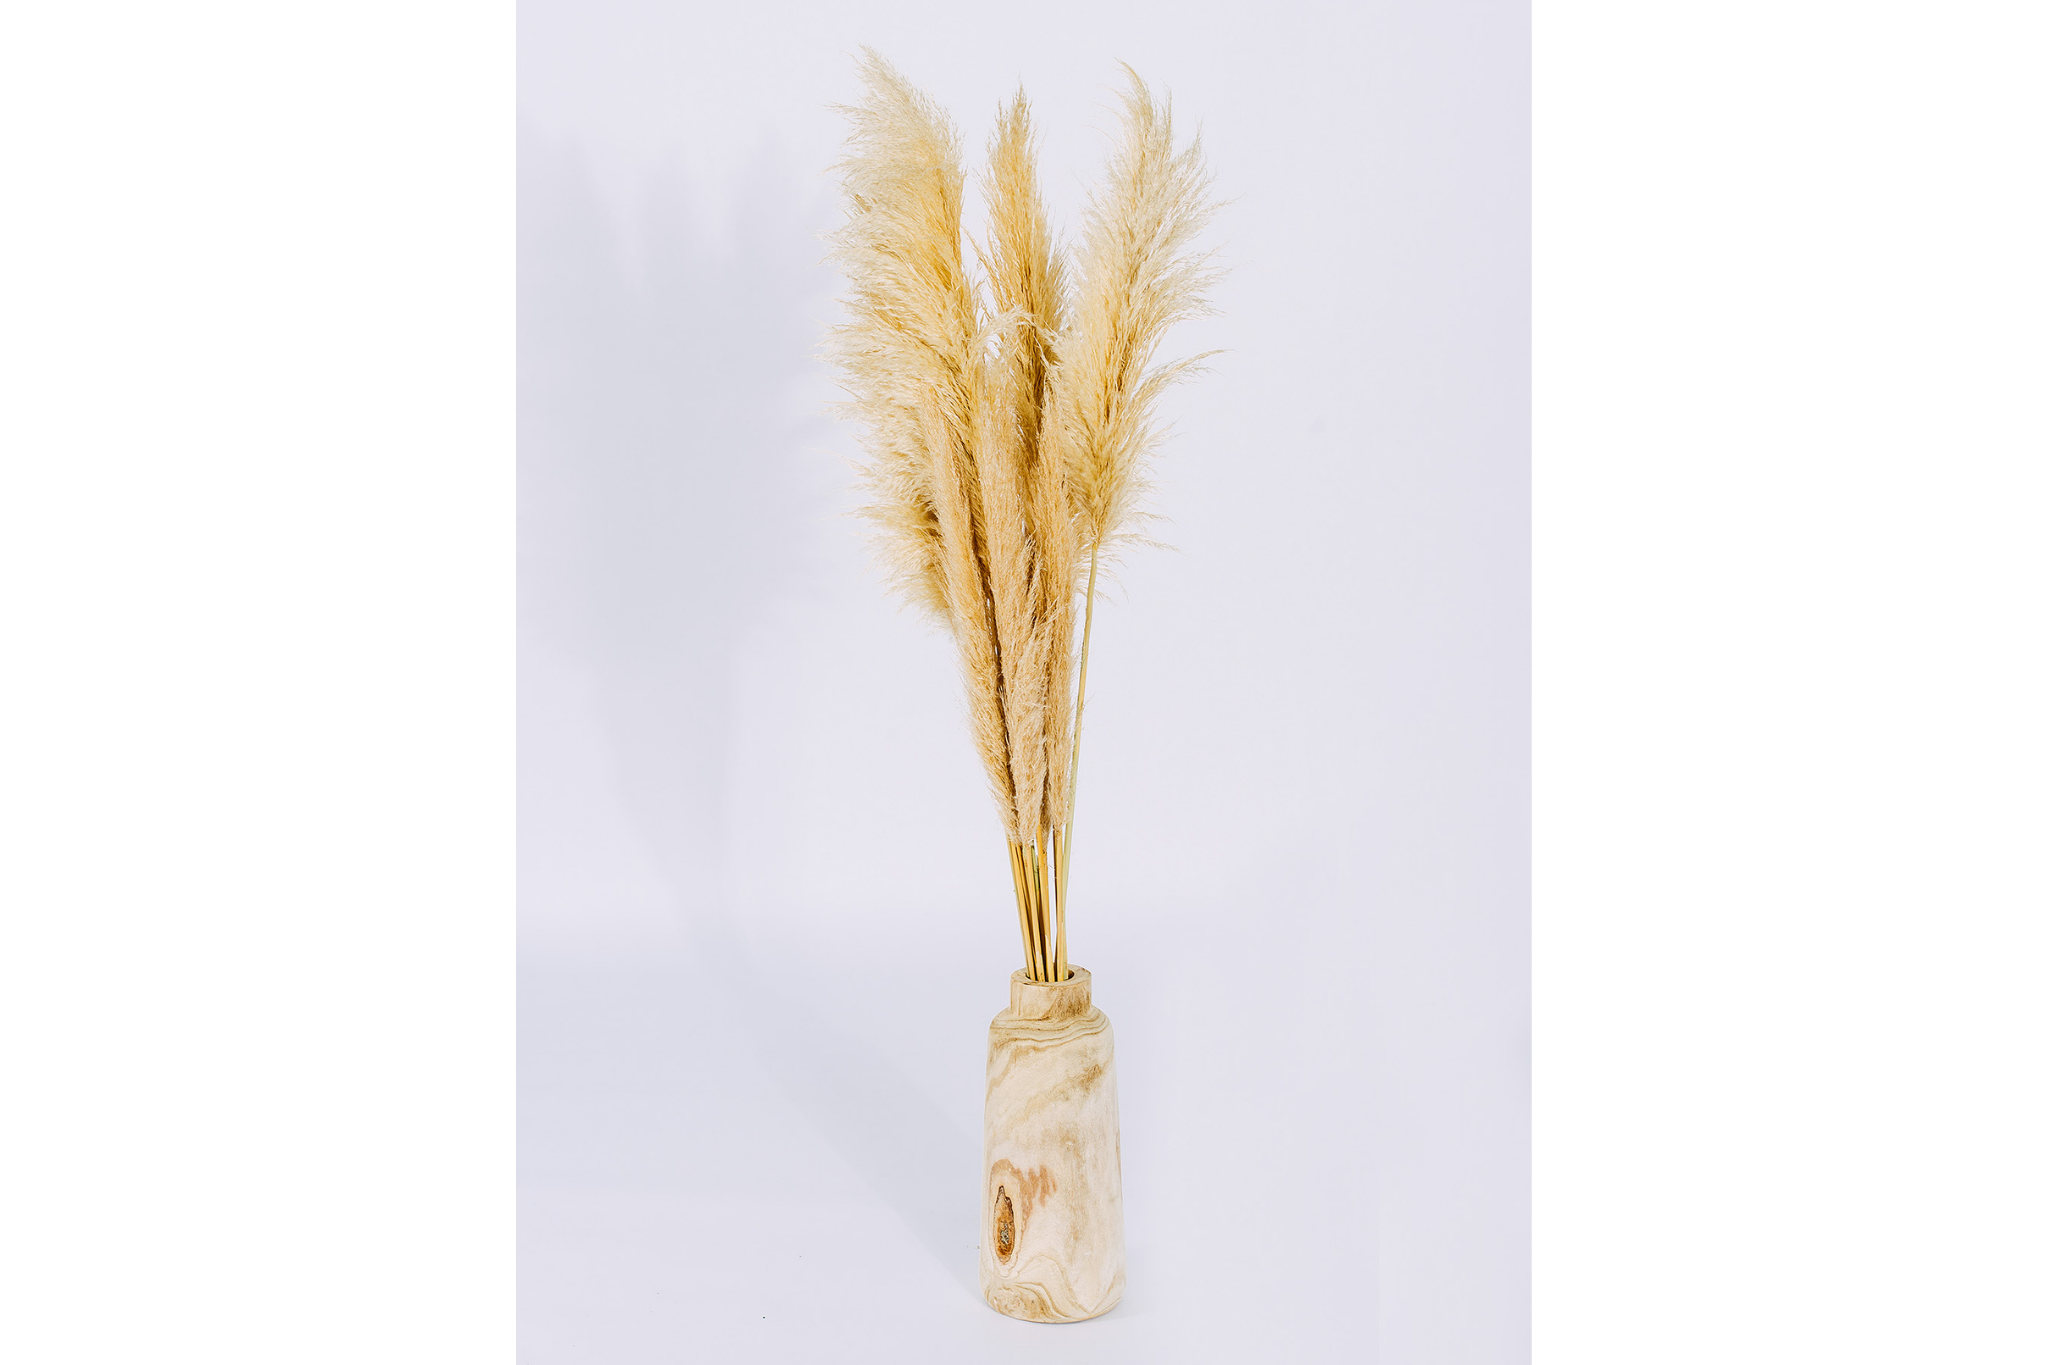 IMAGE OF PAMPAS GRASS IN WOODEN VASE